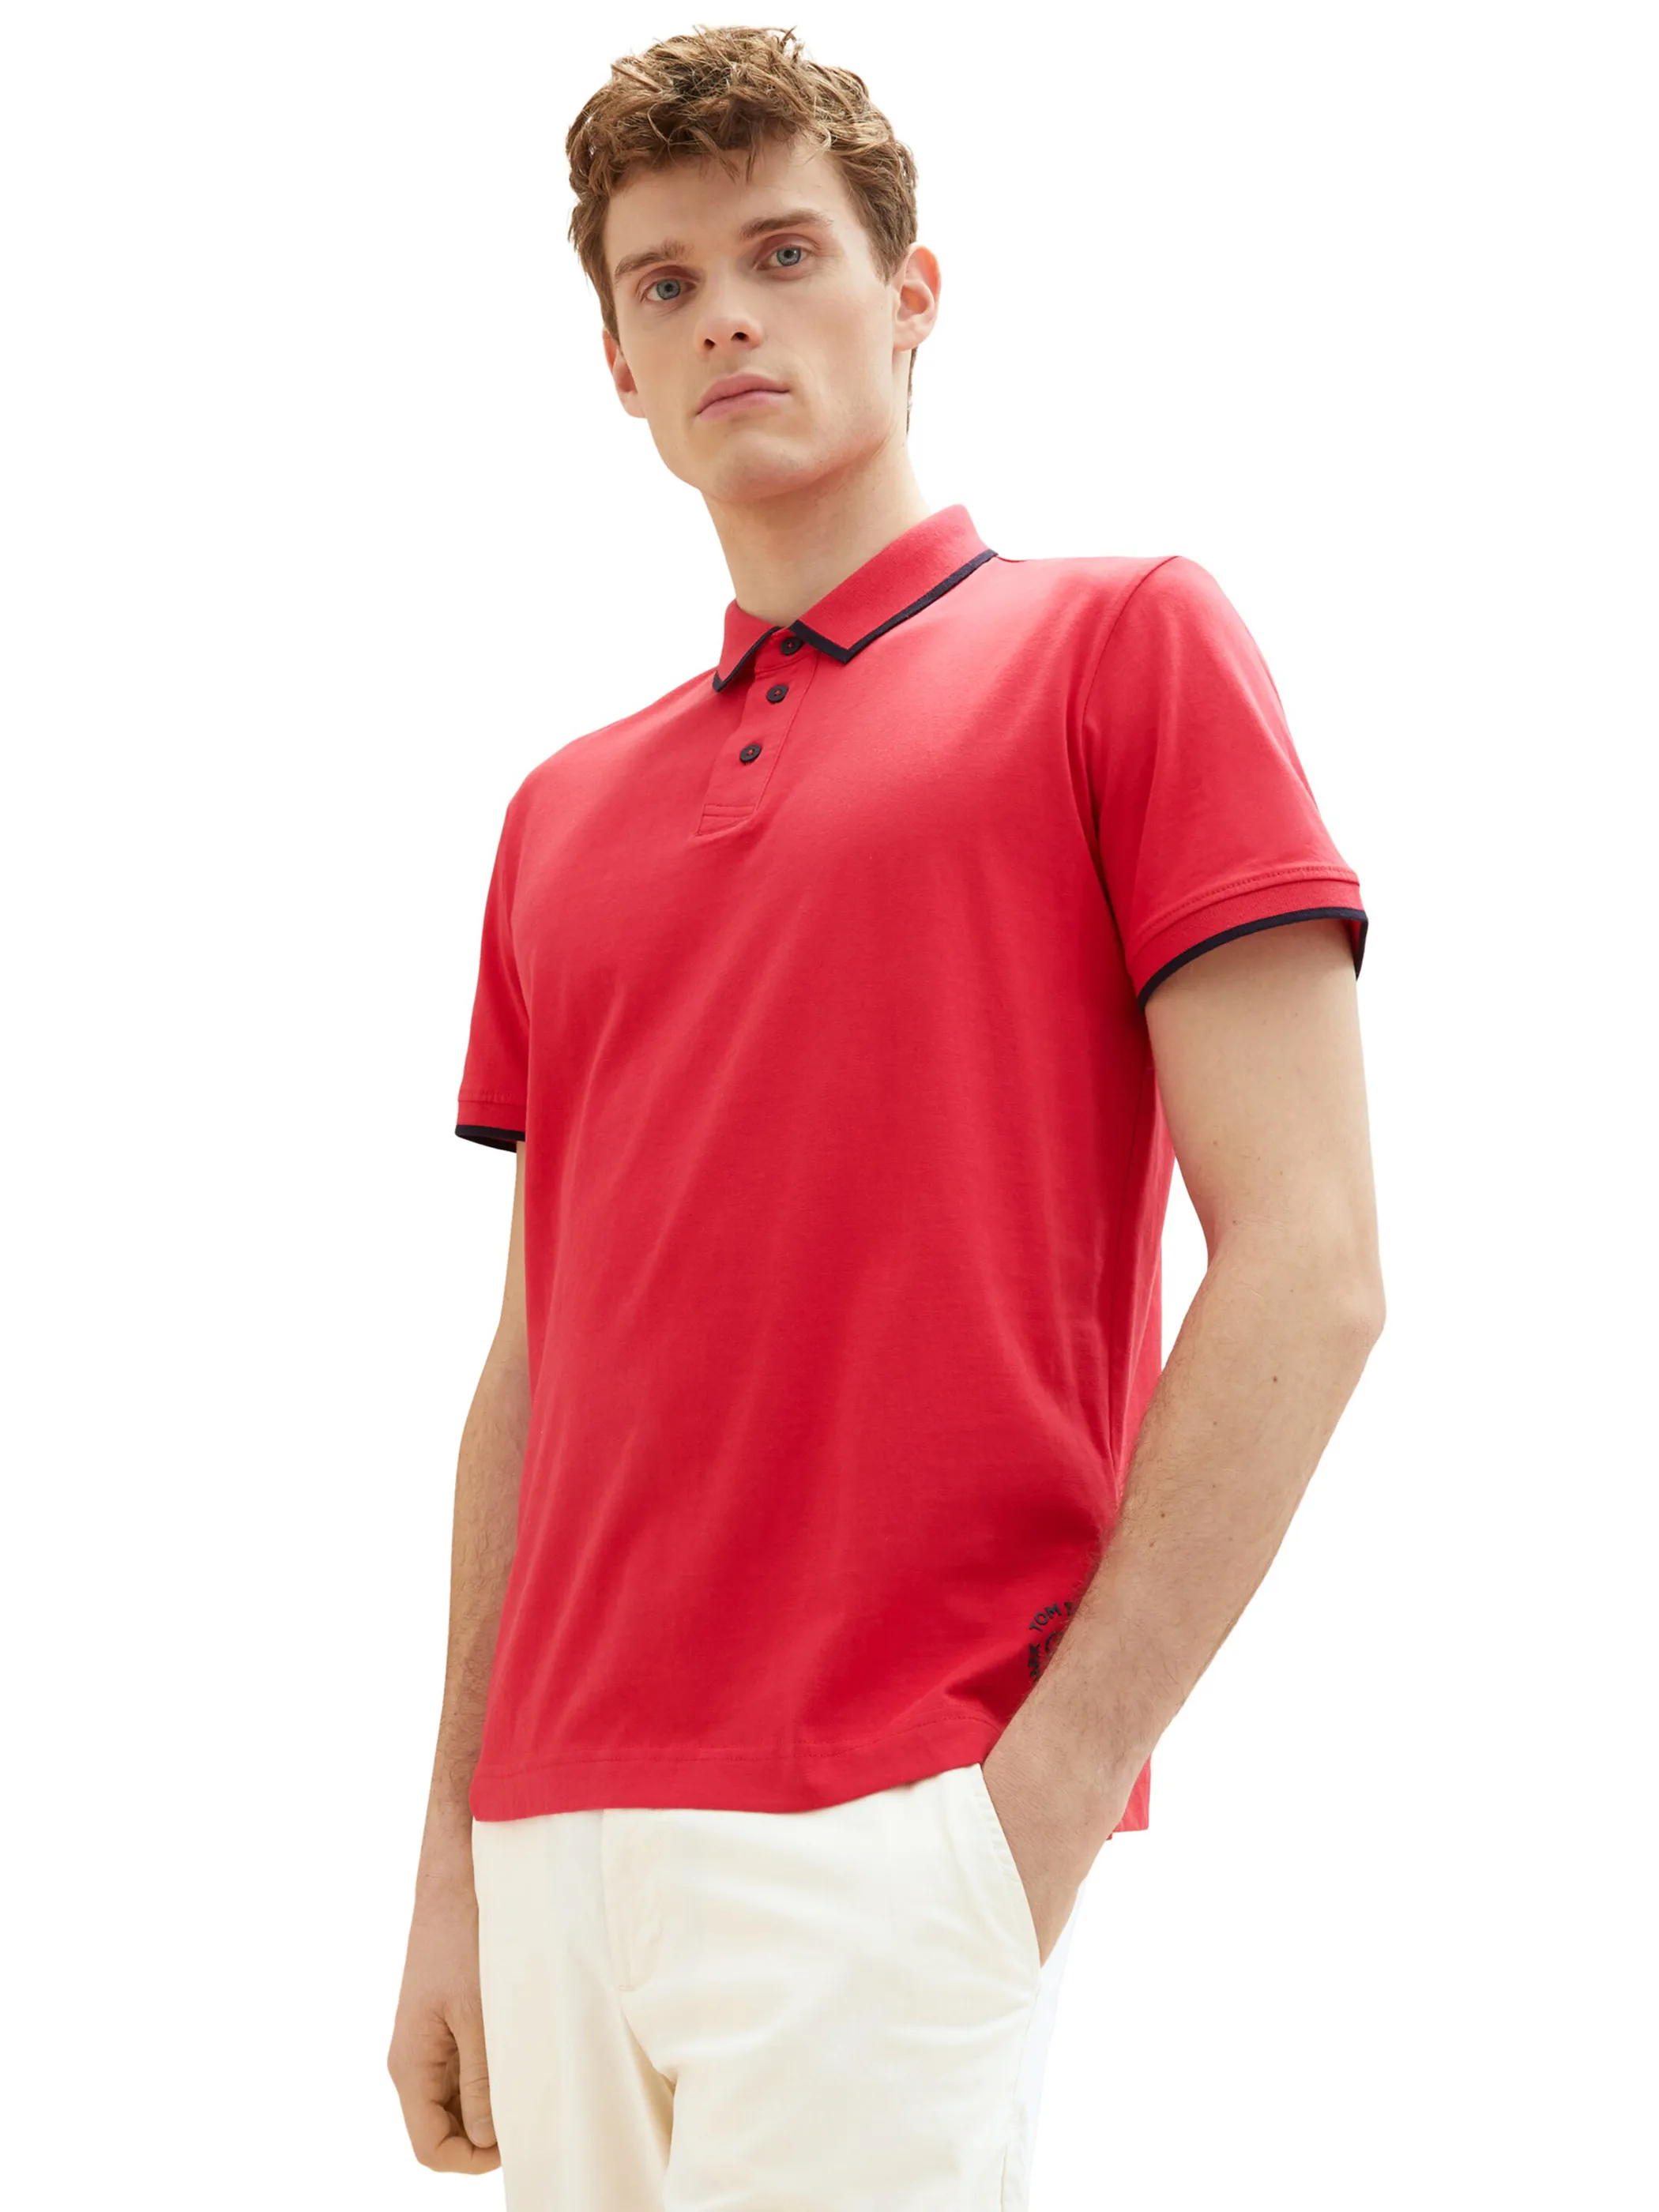 Tom Tailor 1036327 sportive jersey polo Rot 880547 31045 3